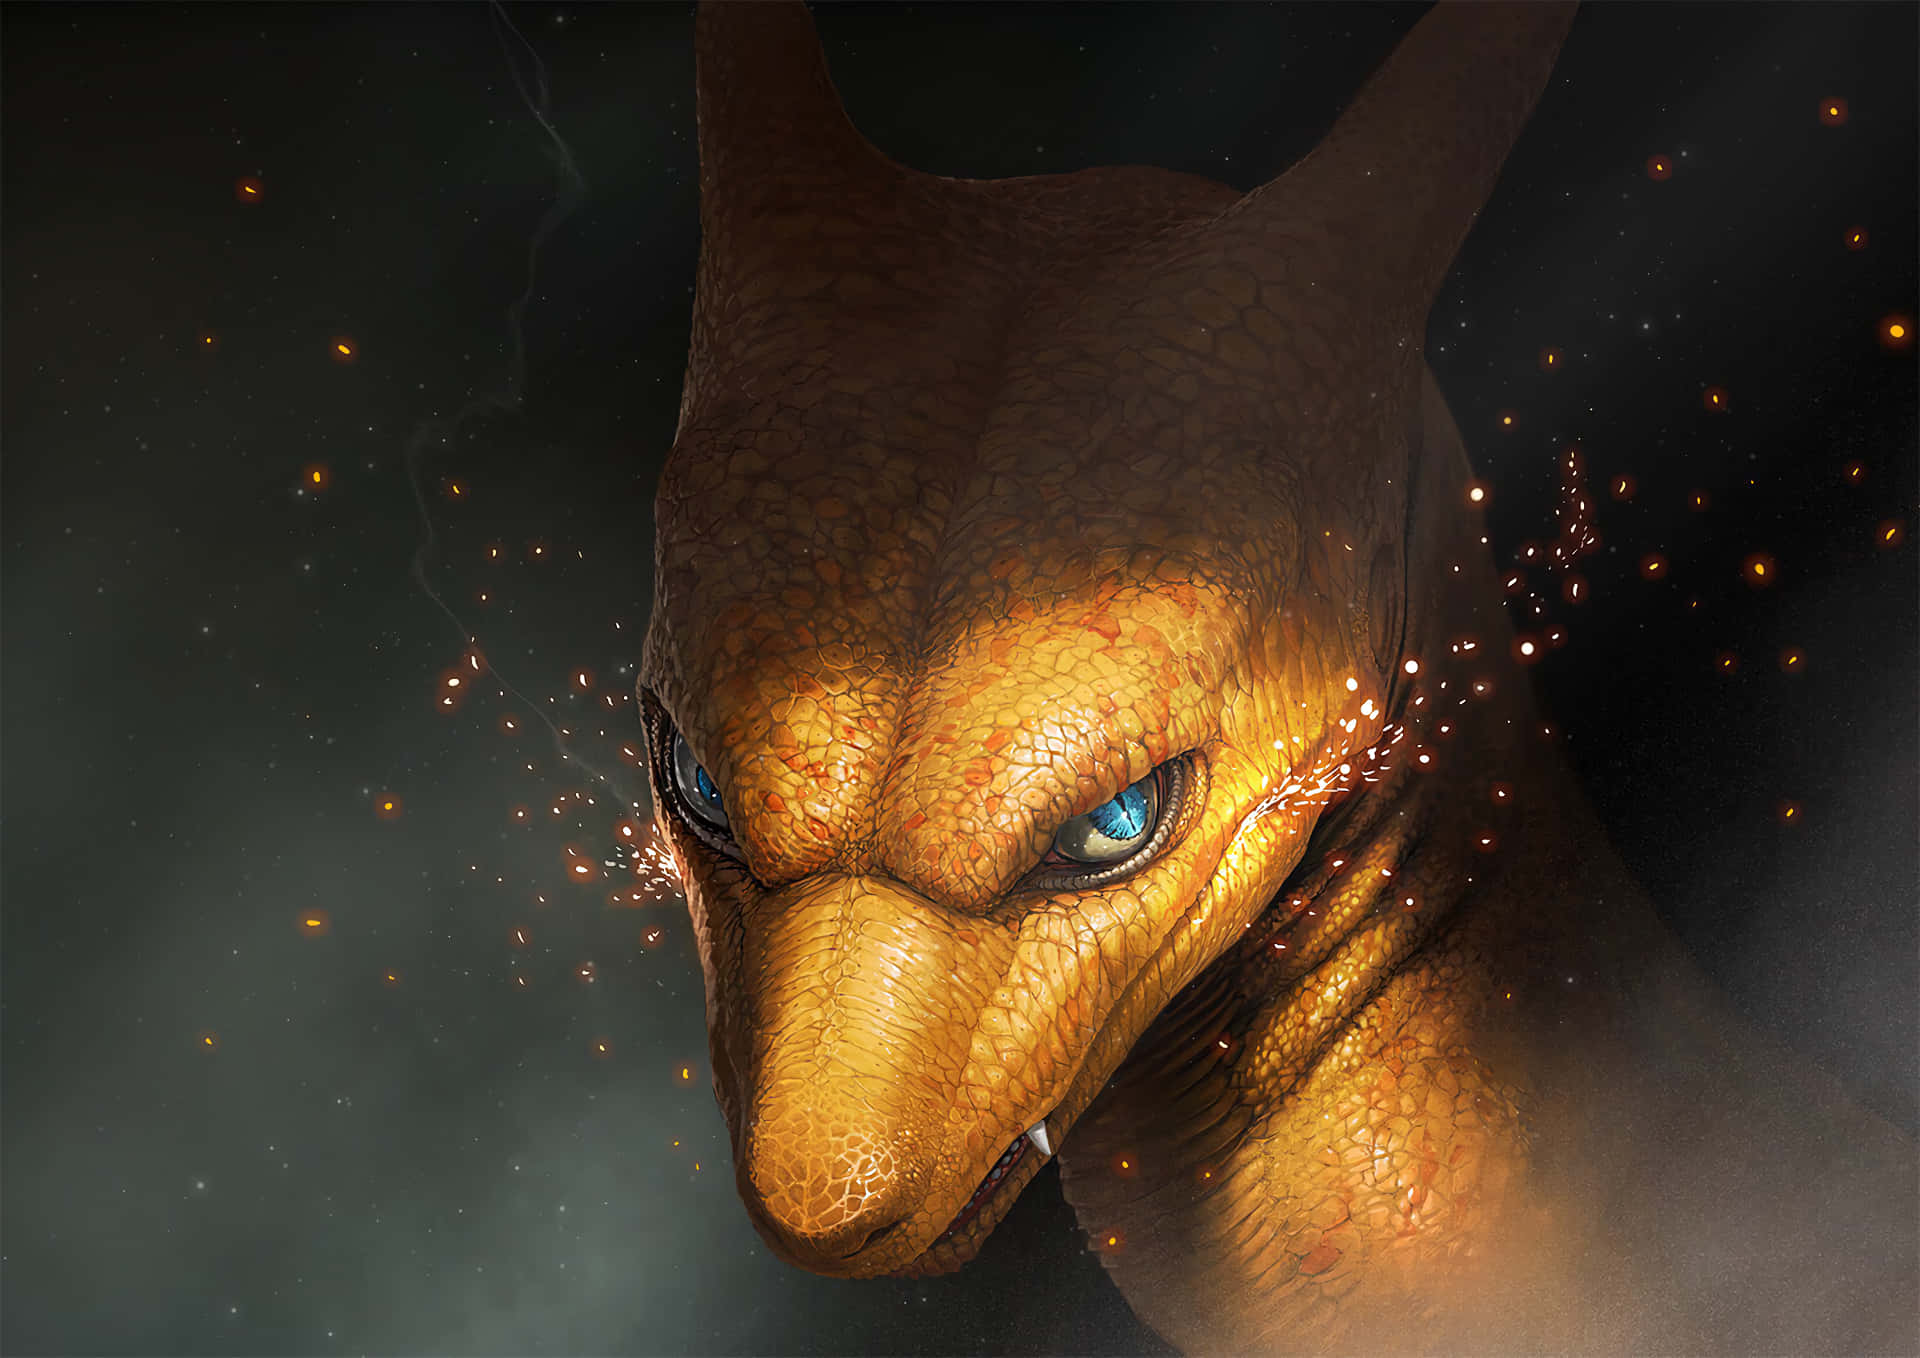 a dragon with blue eyes and a fire in its eyes Wallpaper